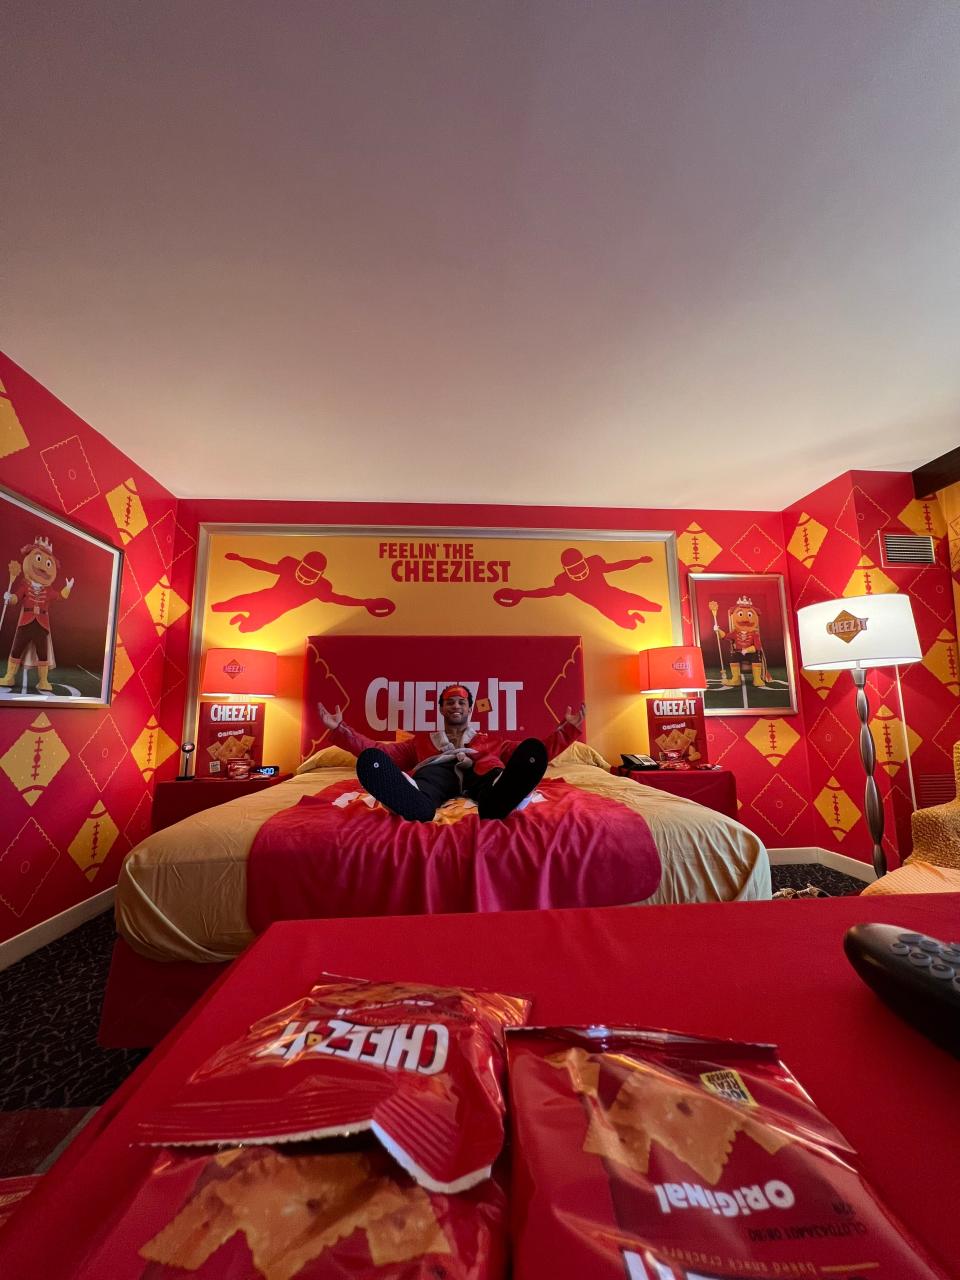 Florida State wide receiver Mycah Pittman in the Cheez-It “Feelin’ the Cheeziest” Hotel Room